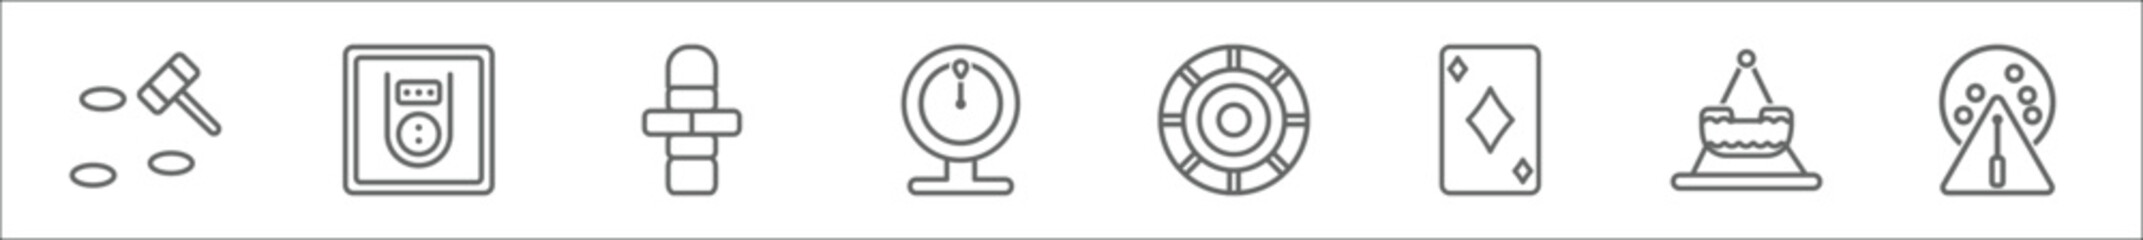 outline set of entertainment line icons. linear vector icons such as whack a mole, skee ball, hopscotch, spinning wheel, game chips, diamond ace, fair ship, lottery